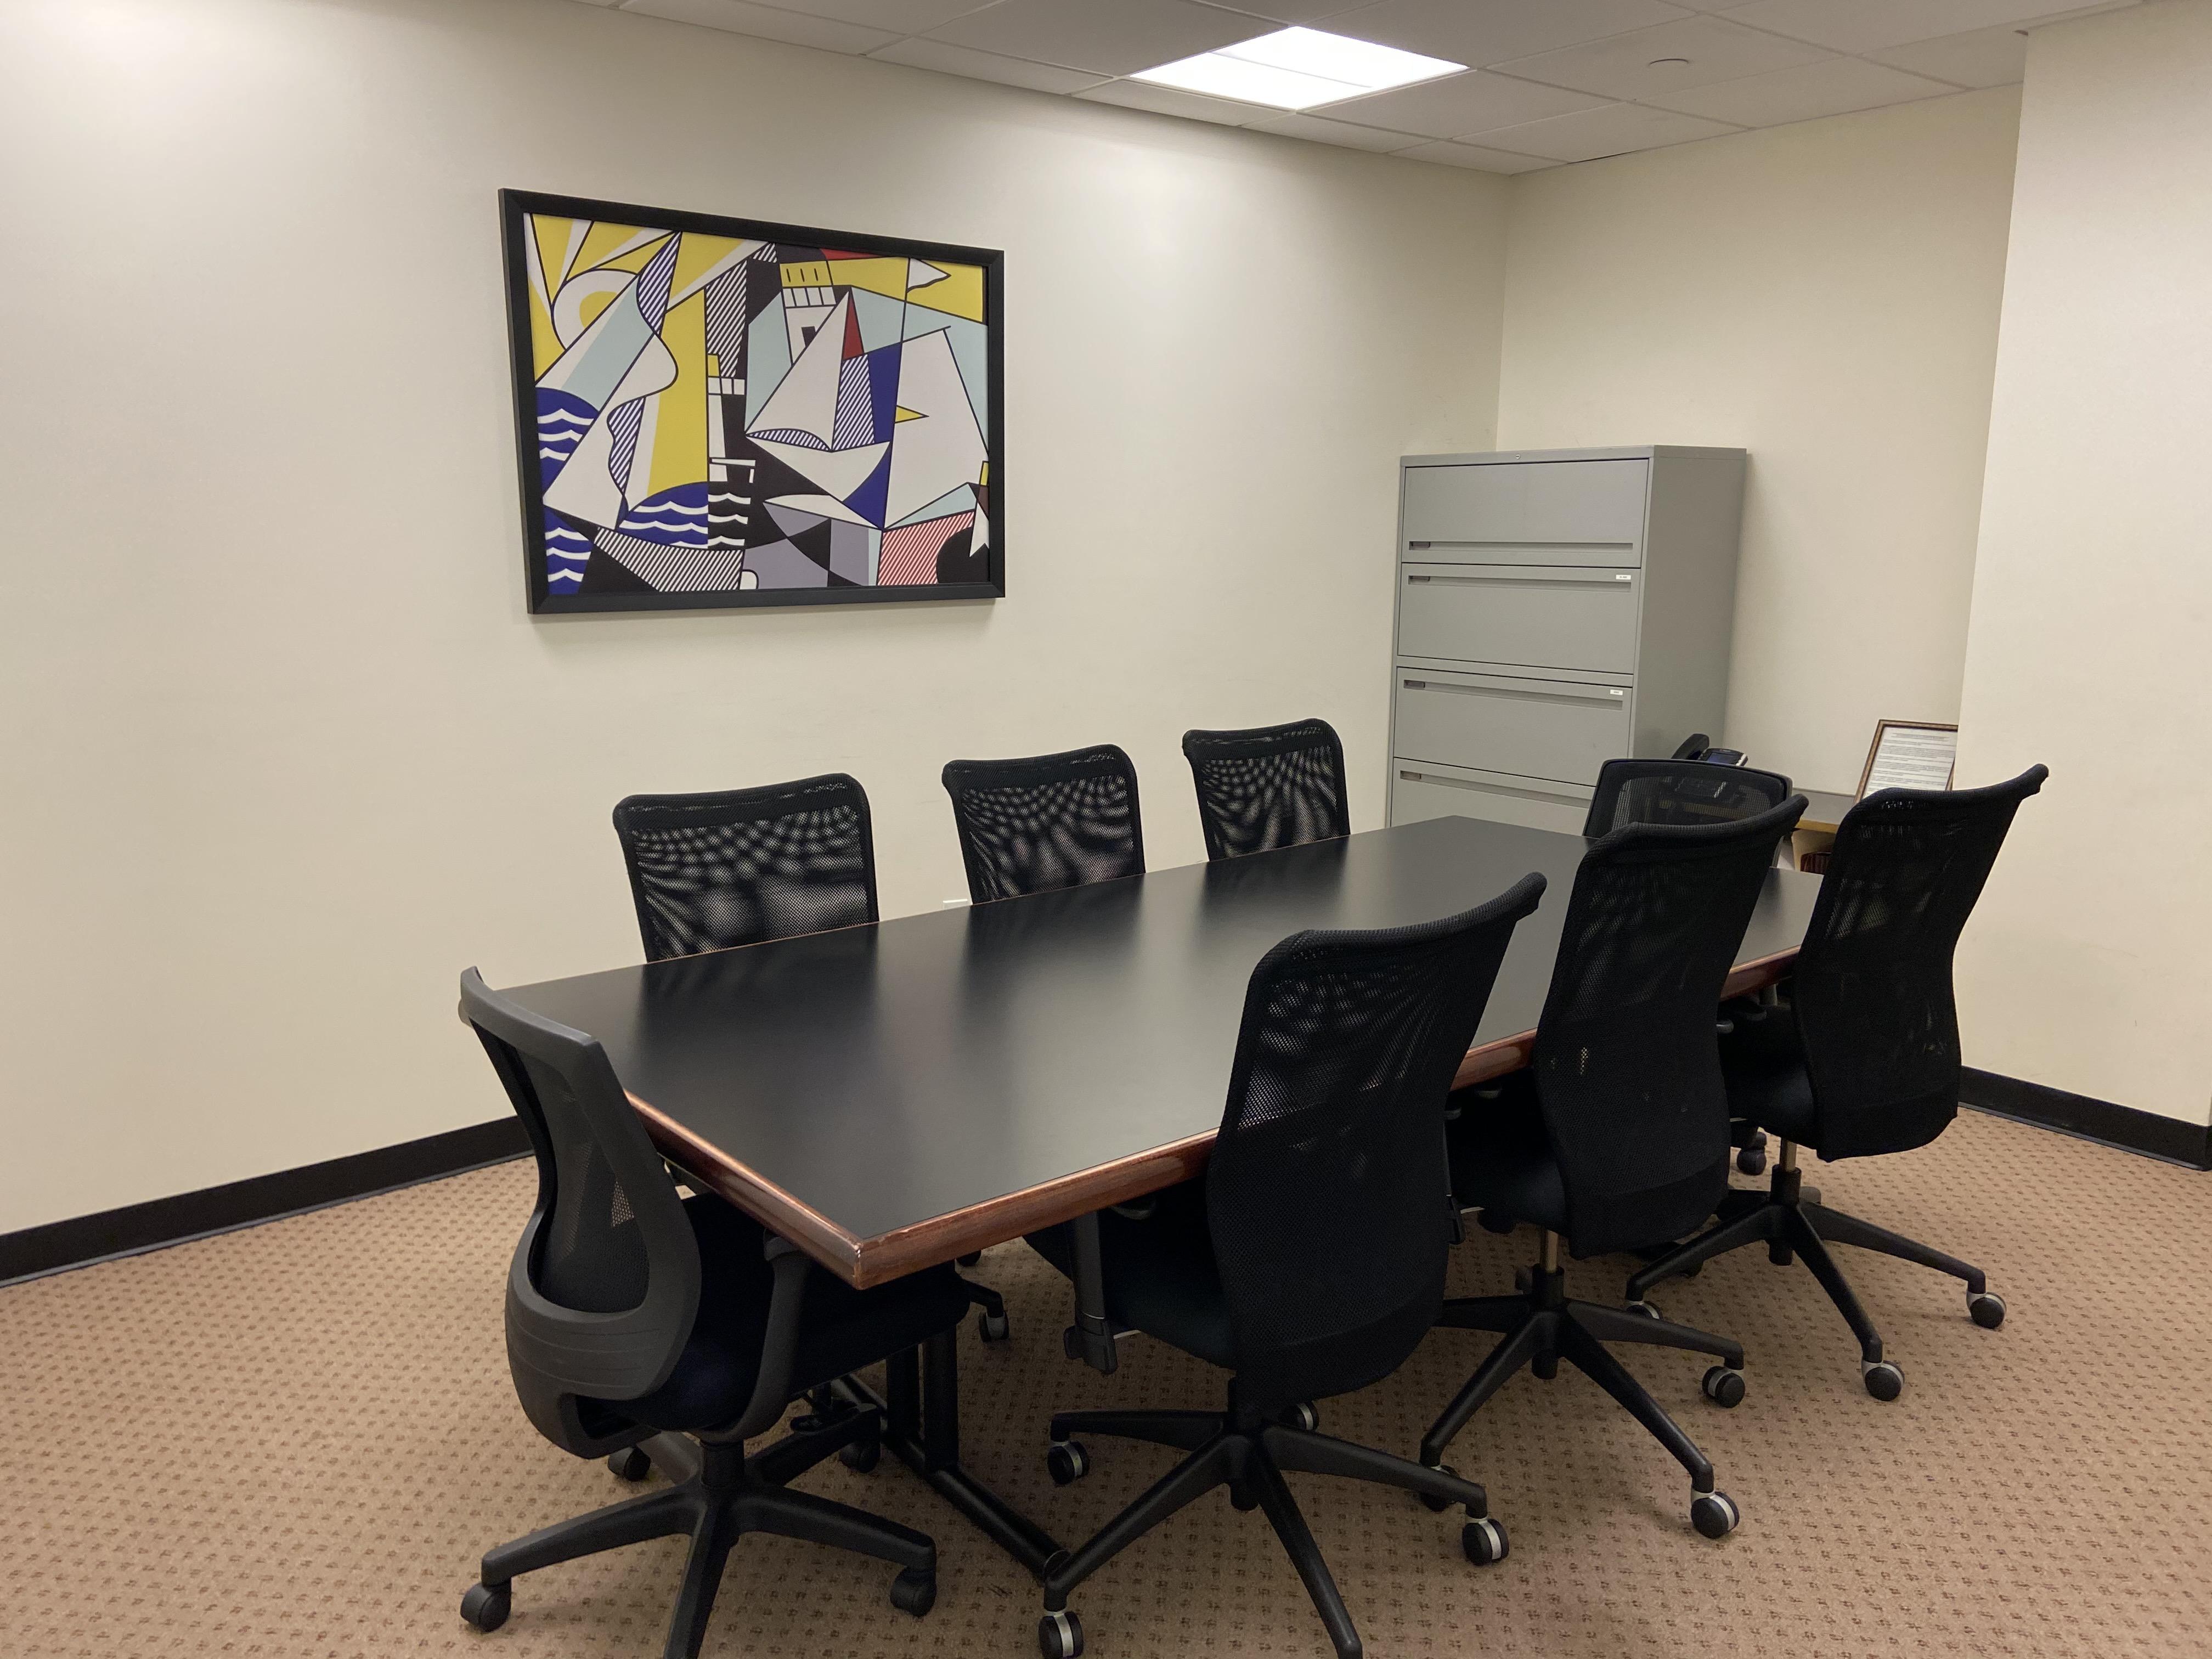 18 East 48th Street New York NY Conference room